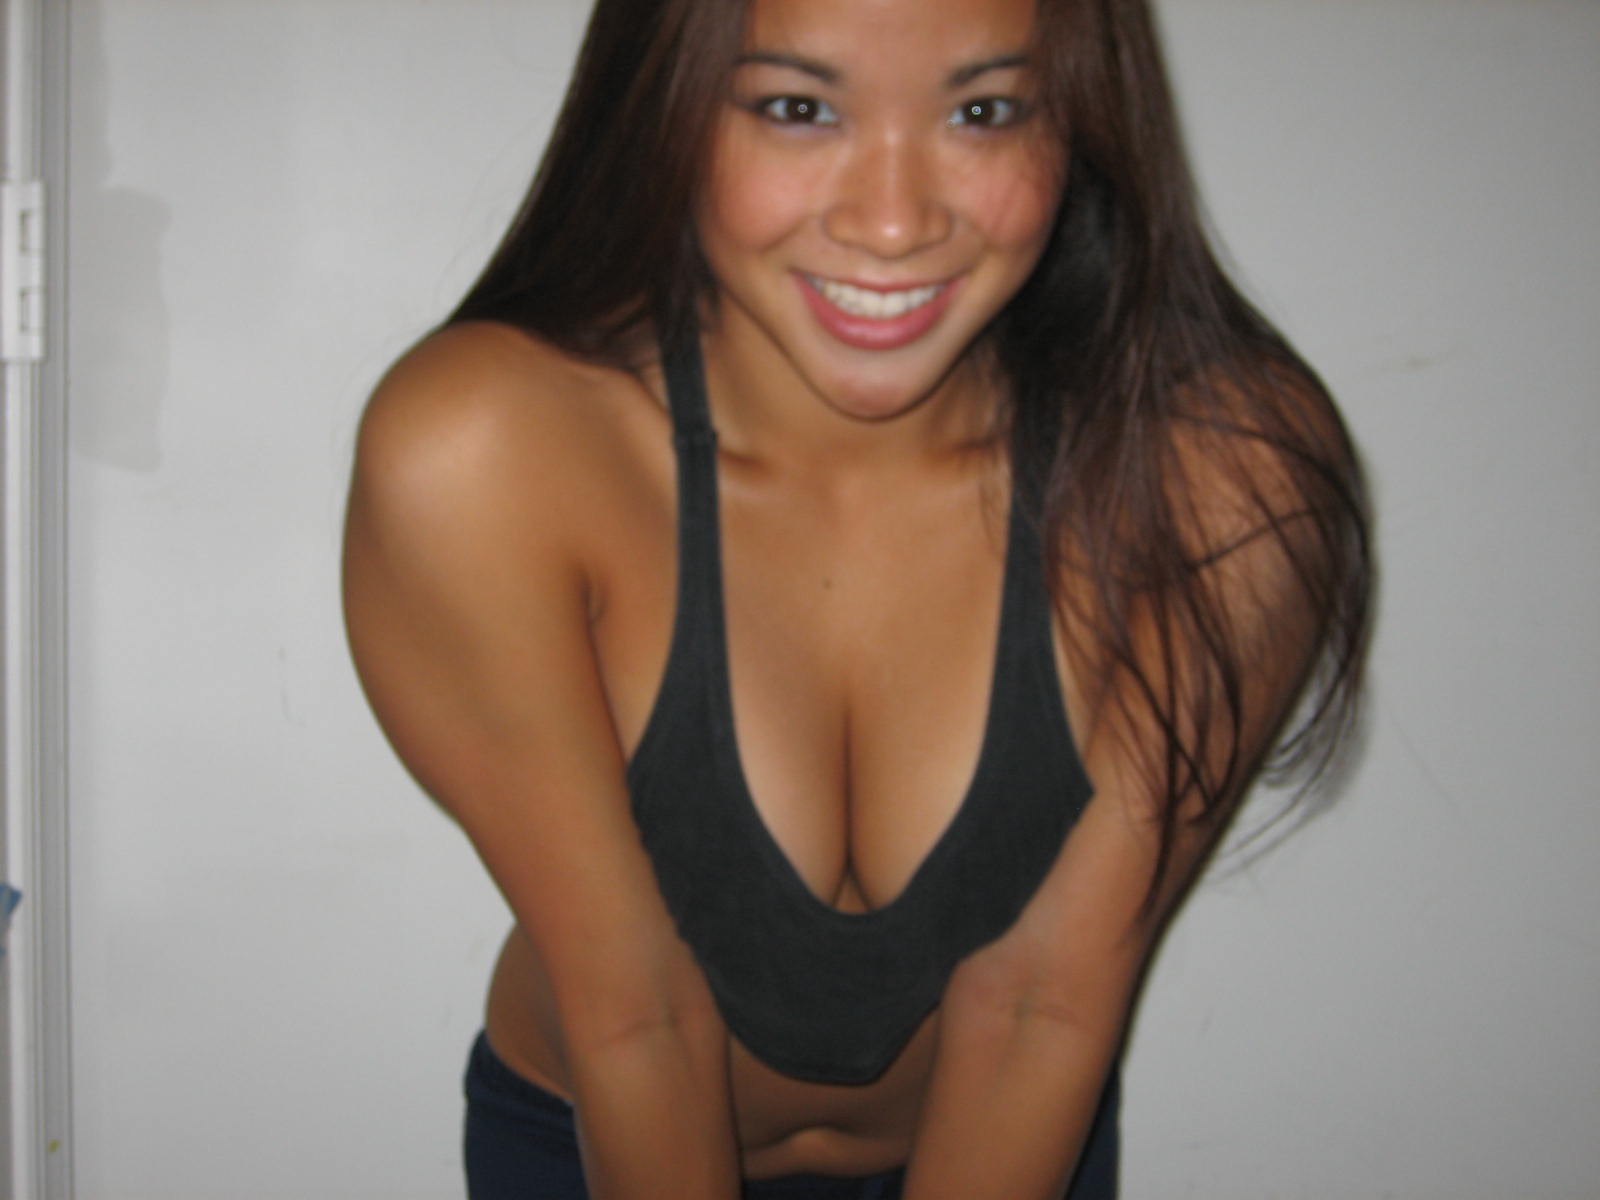 Amateur Shaved Totally Shaved Asian Girlfriend with Small Tits photo photo